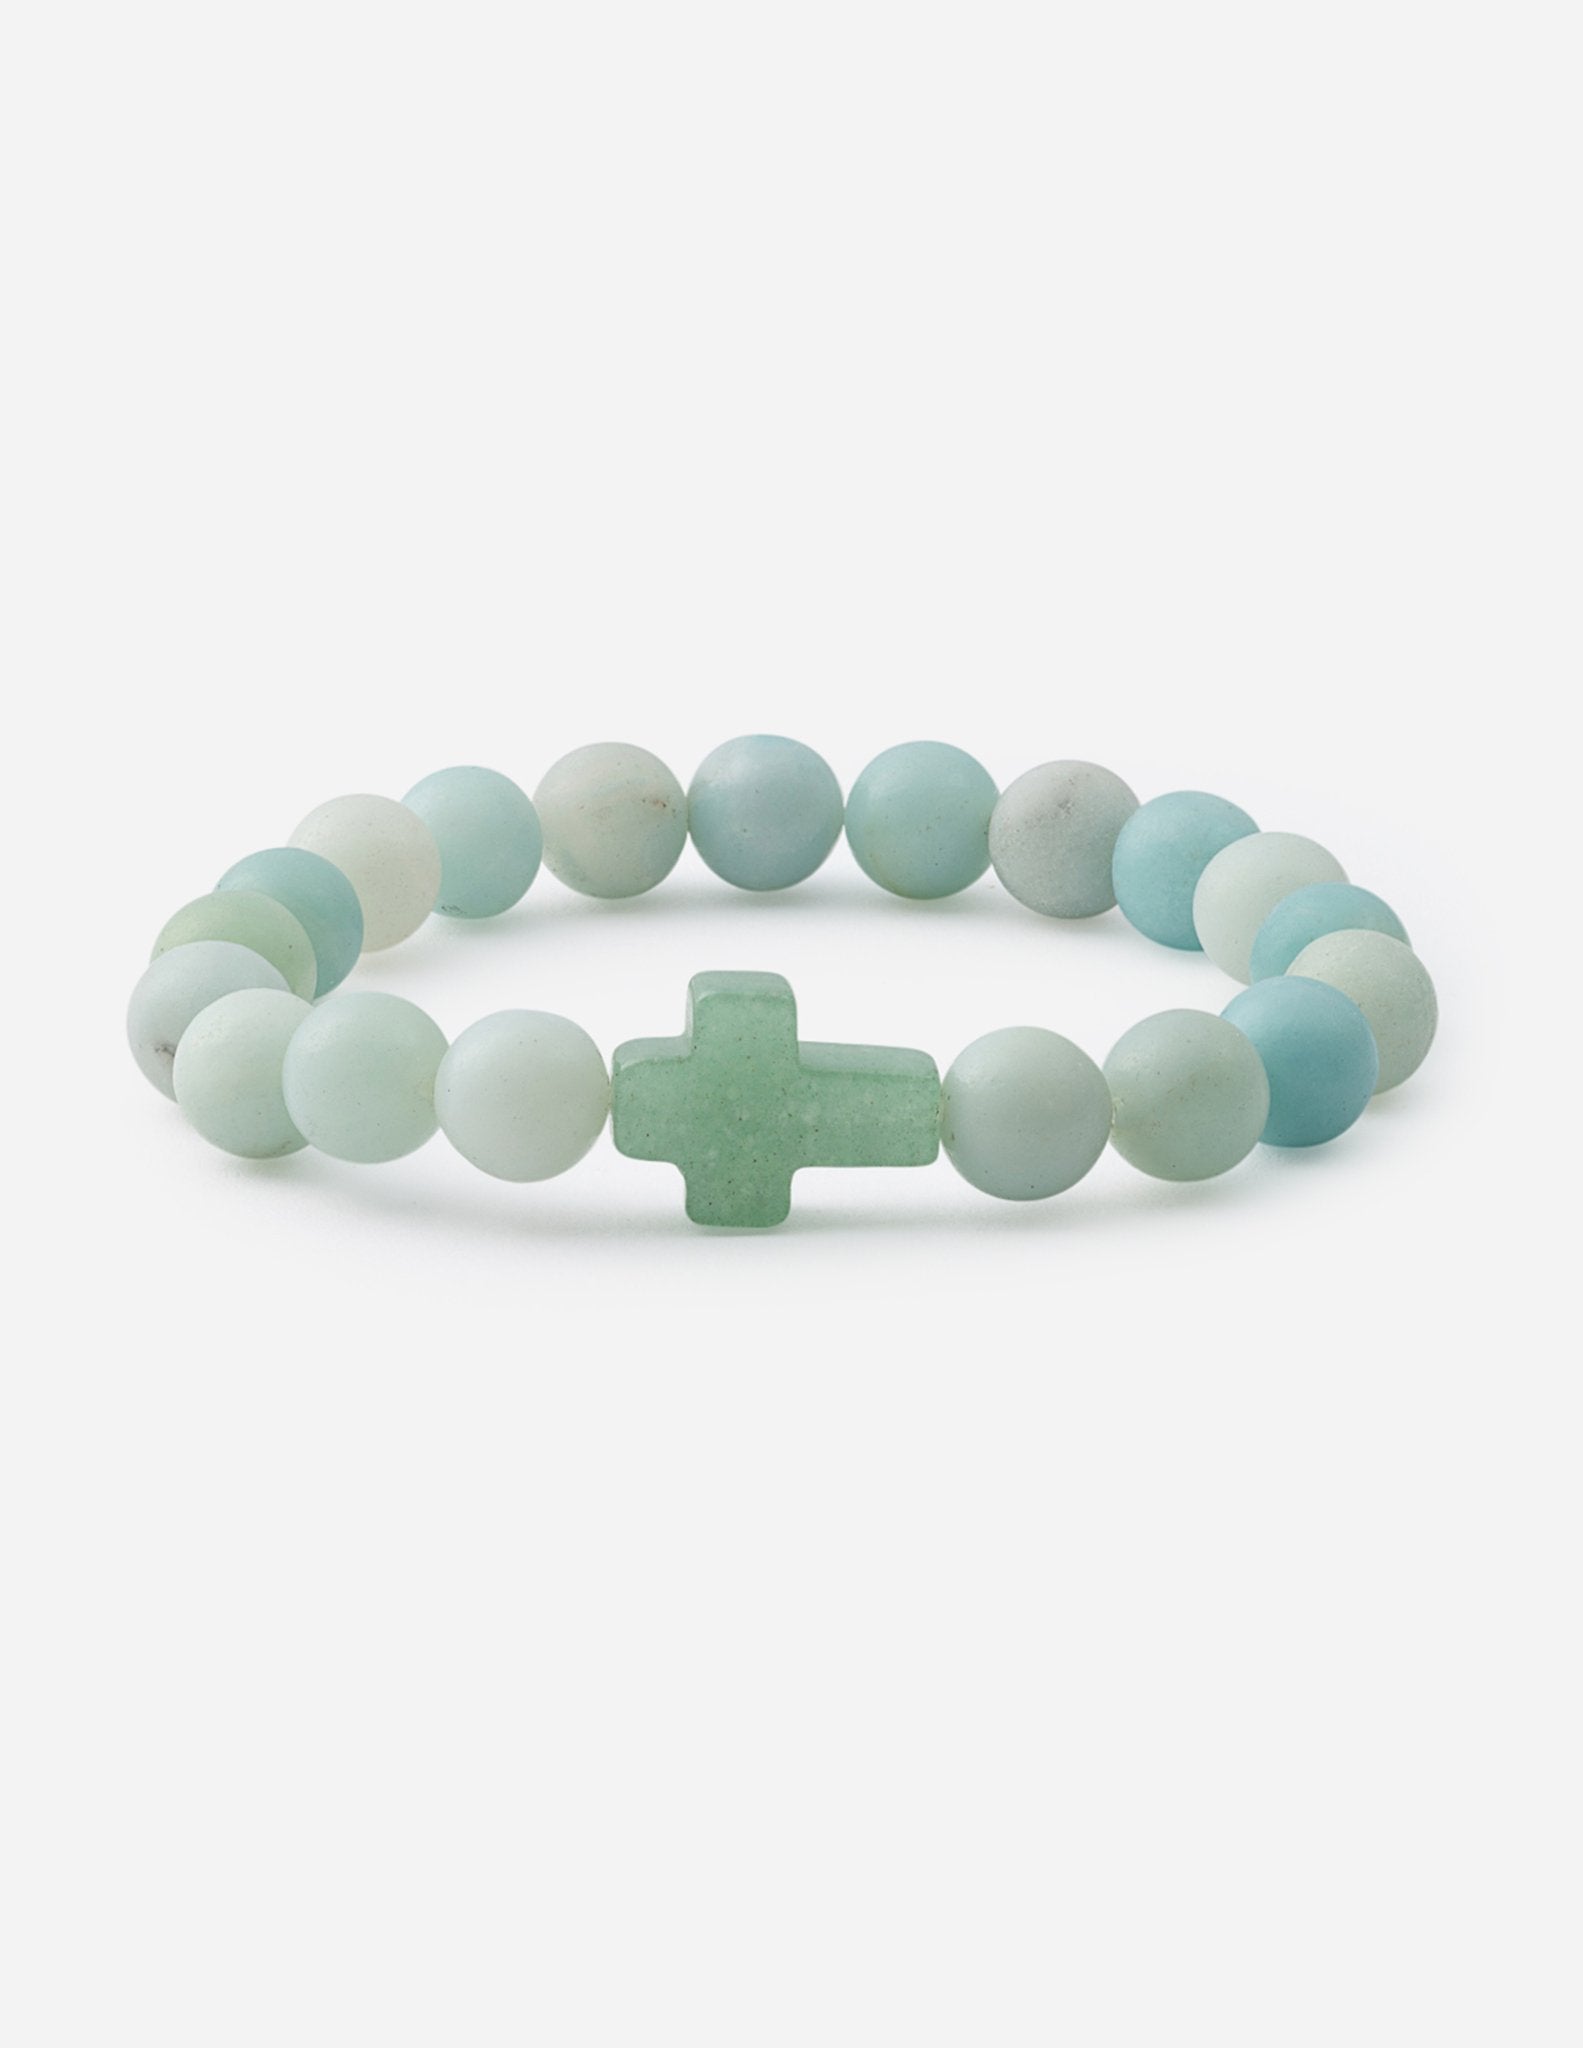 Amazonite is a beautiful green-blue stone that has been used for centuries  as a powerful talisman for protection and healing. . Rudraksha beads of  Nepal is used as mala, bracelet & worn